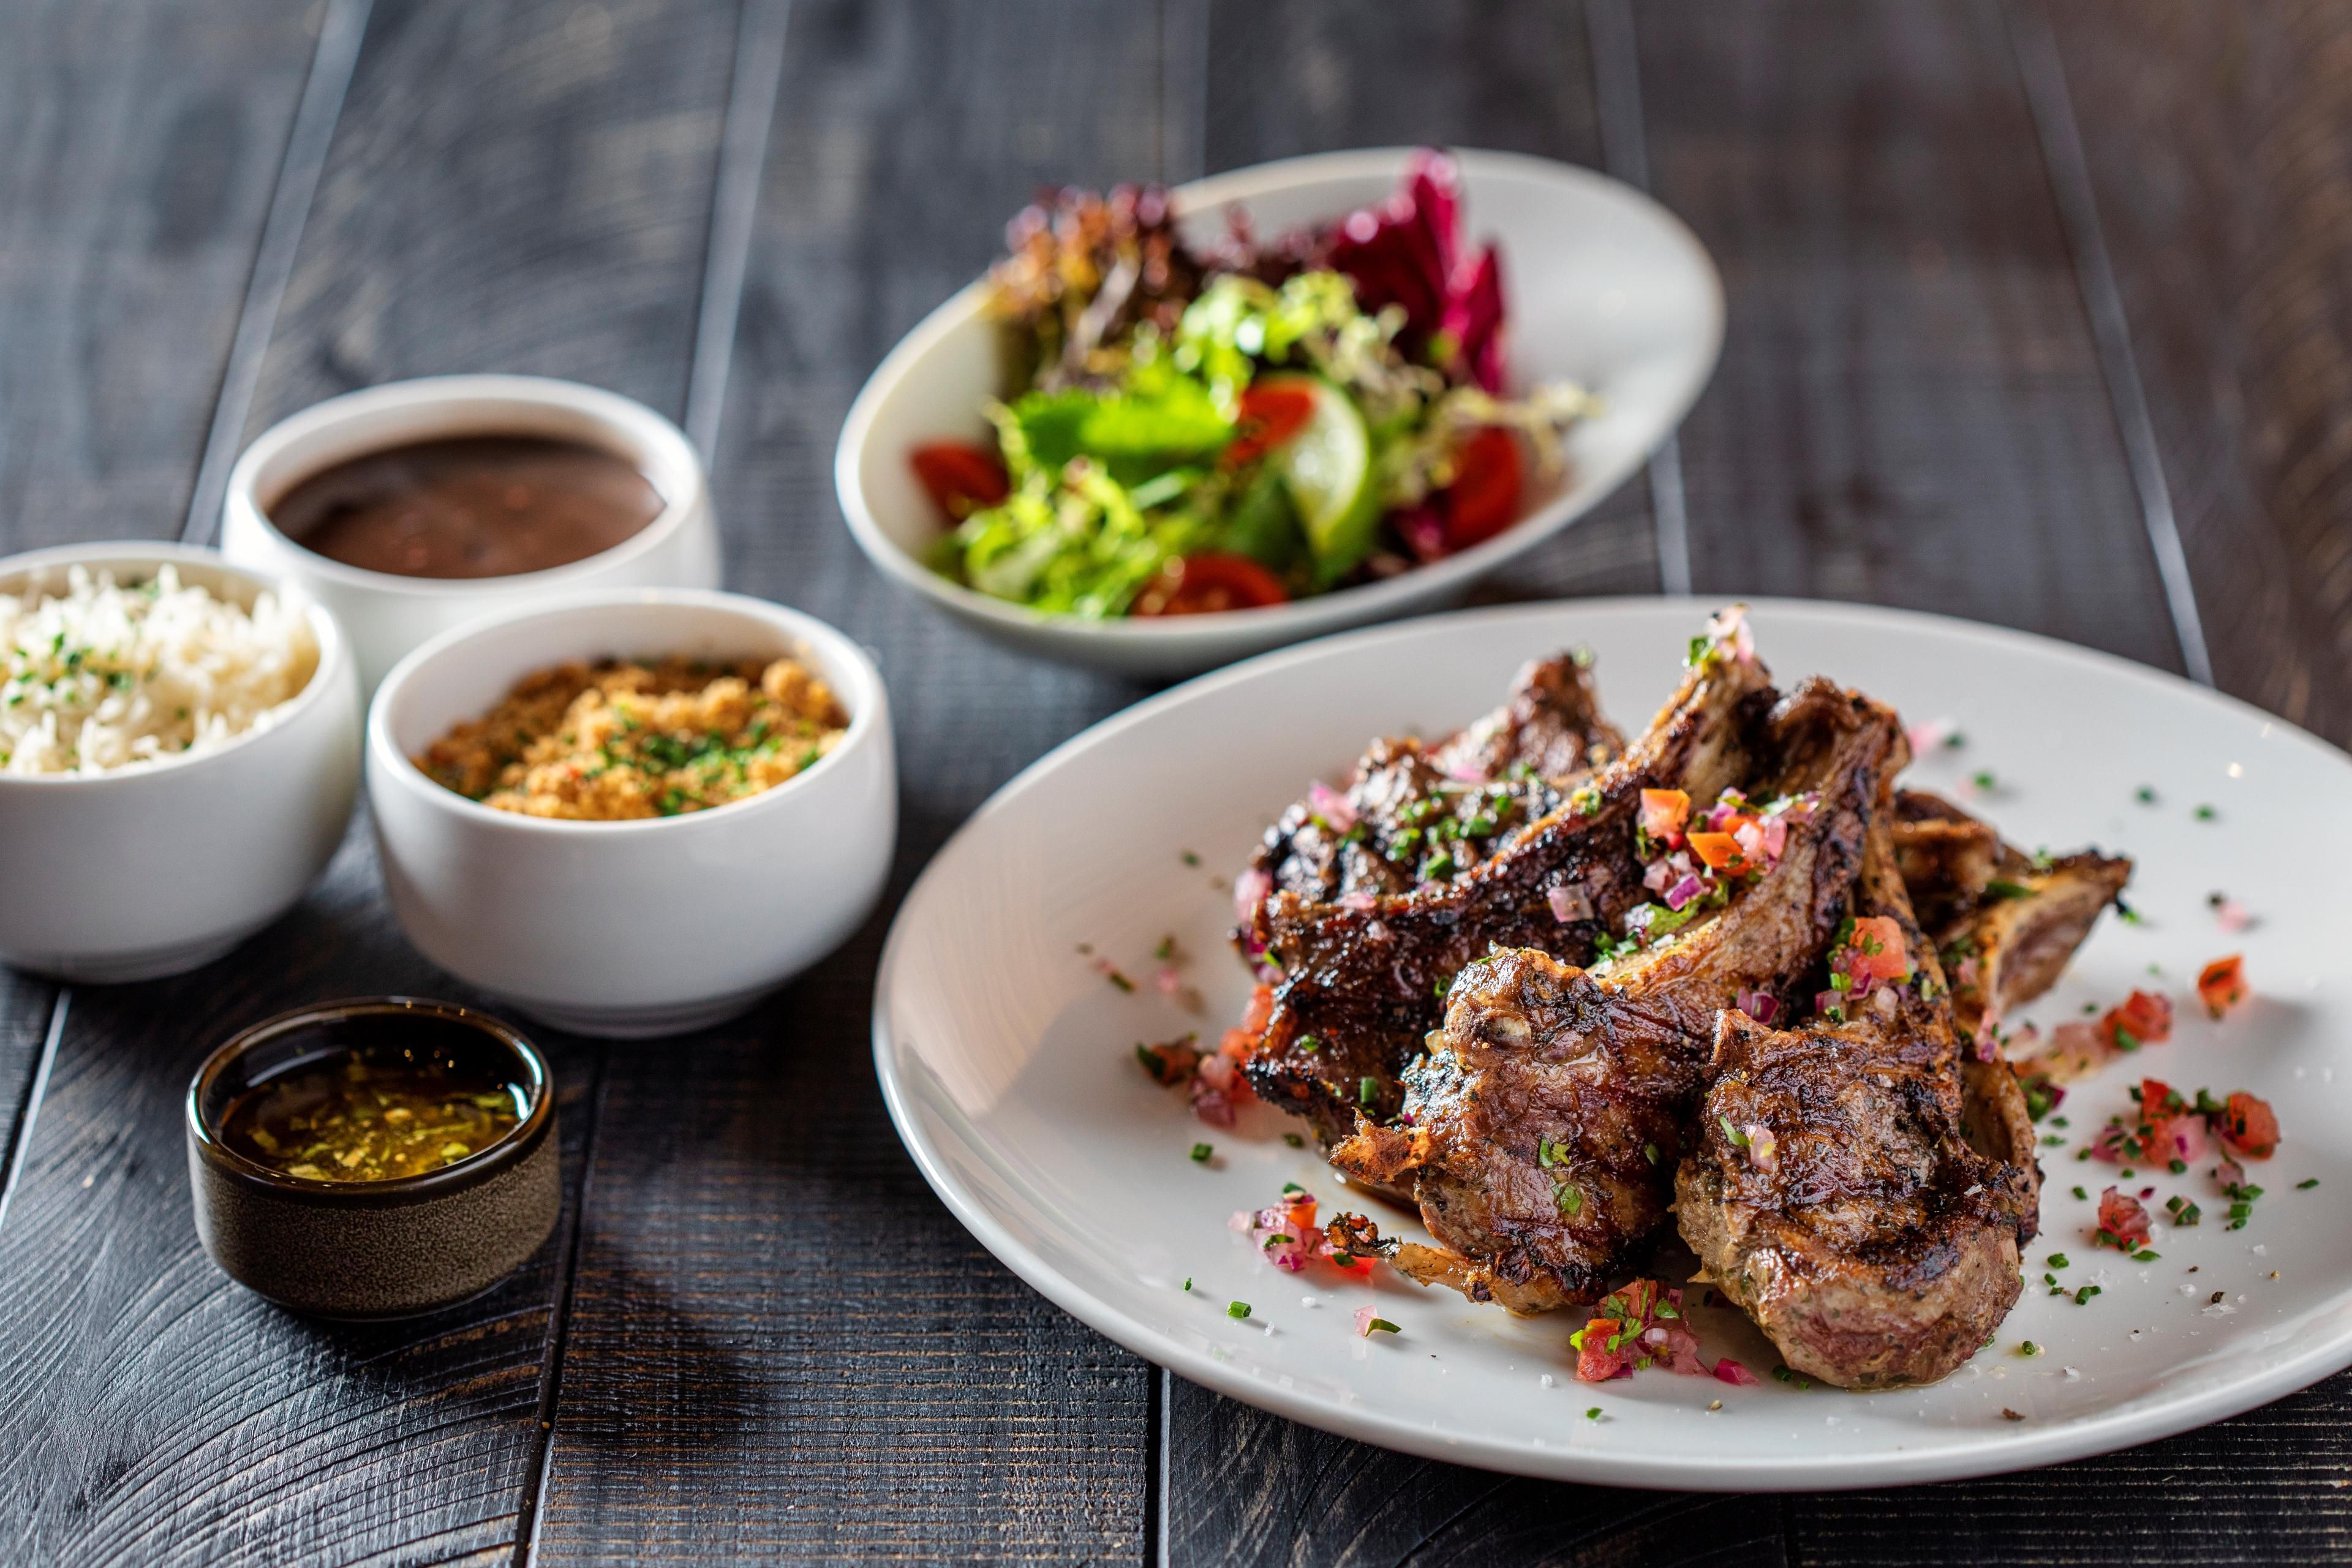 Lamb chops grilled and flavoured to perfection